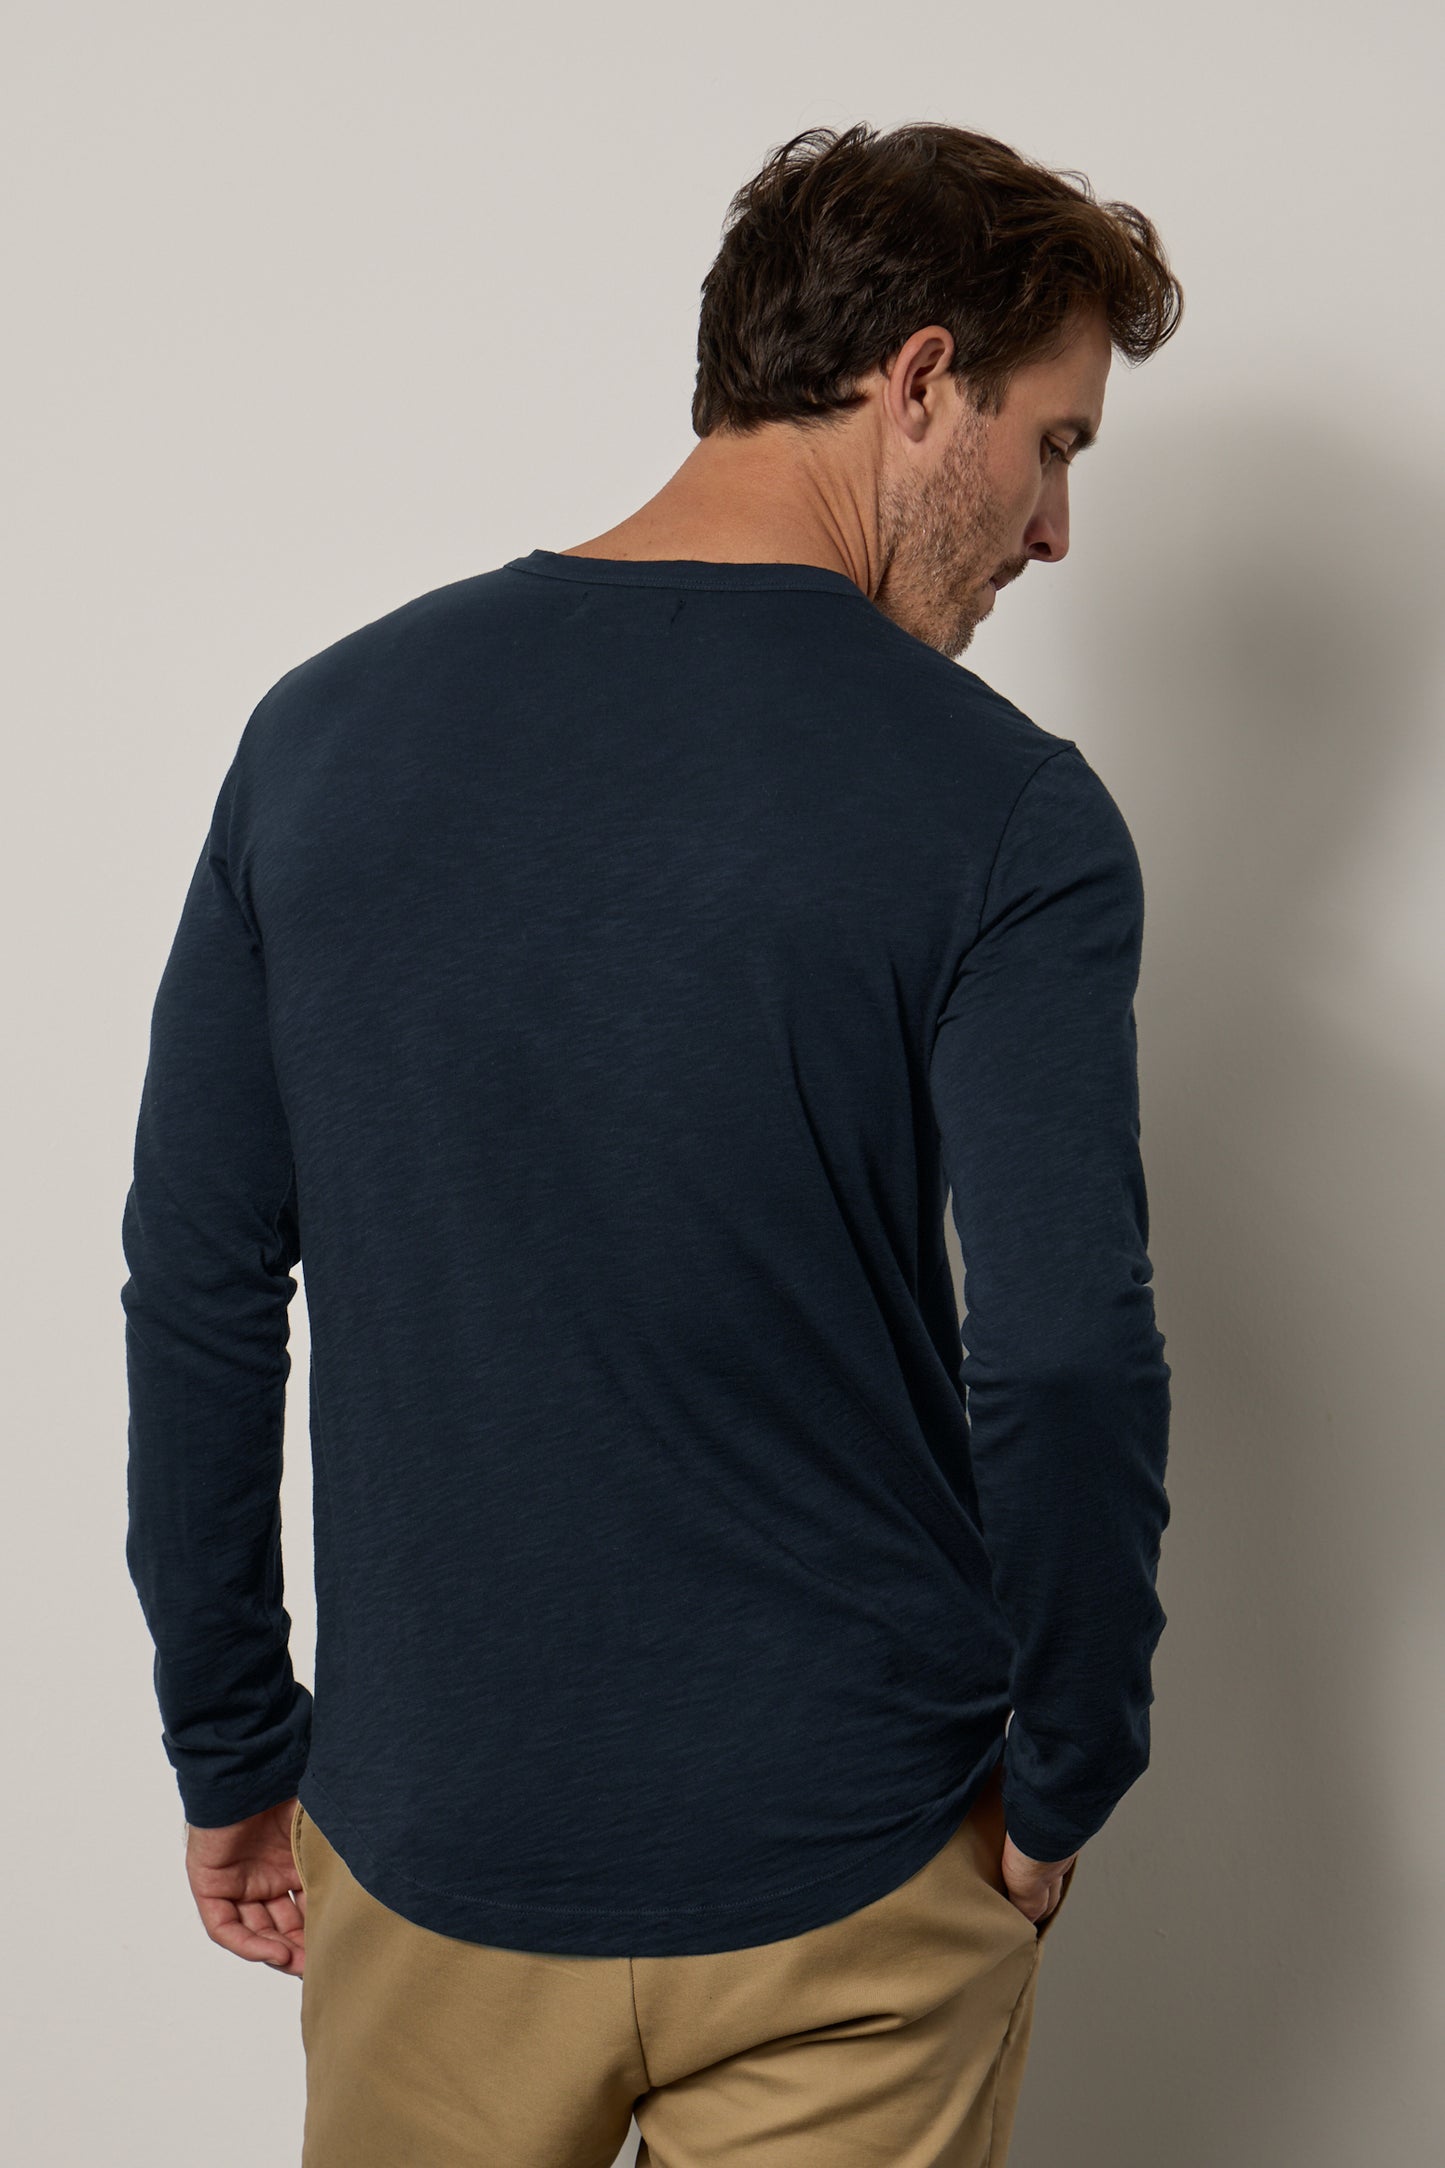 The back view of a man wearing a Velvet by Graham & Spencer KAI CREW NECK TEE showcases the subtle curve and flawless fit of the true slub knit fabric.-35607579263169